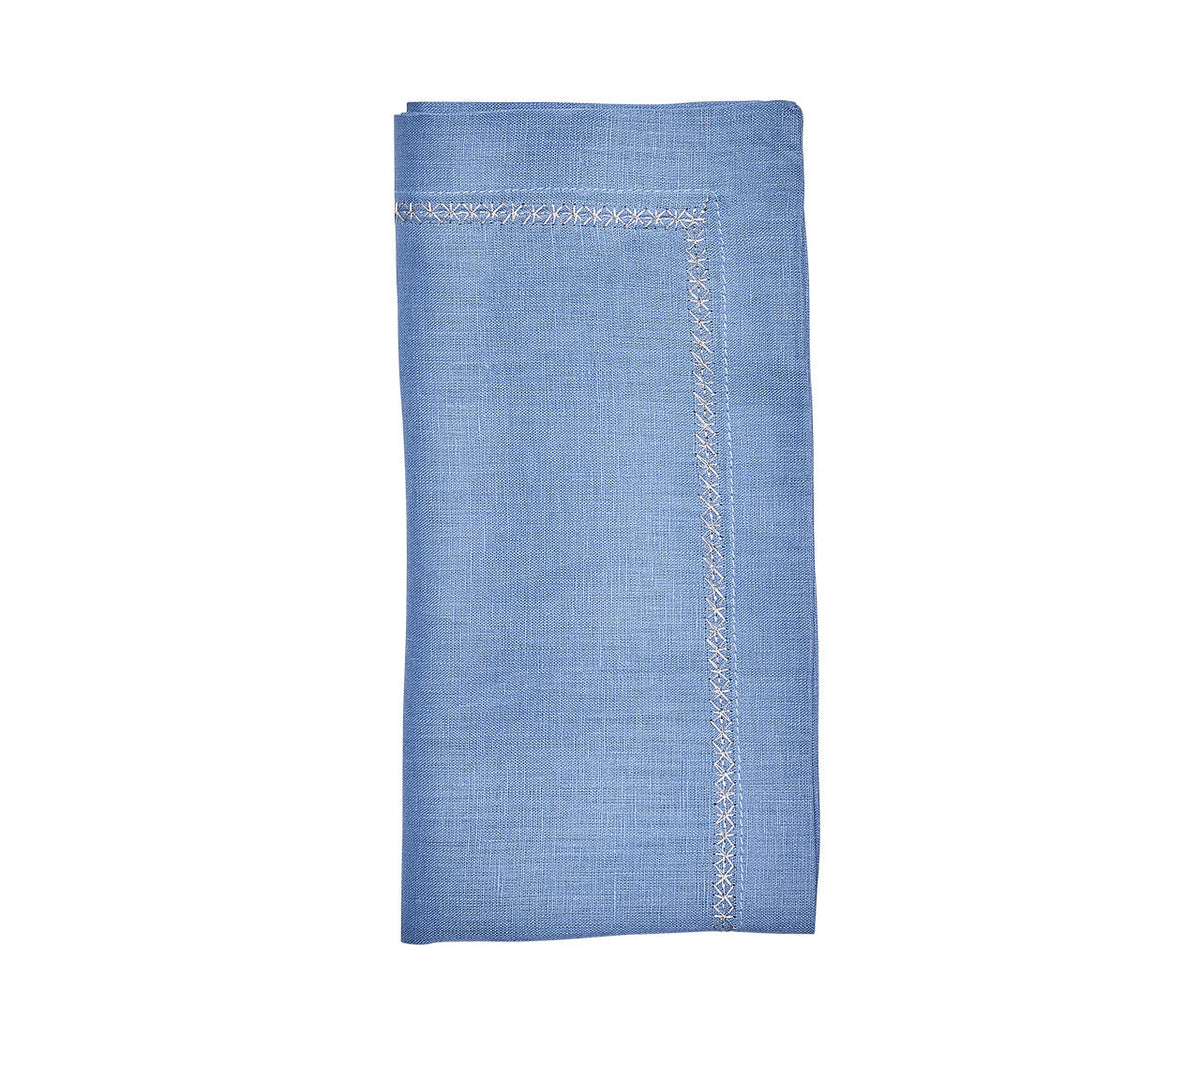 Classic Napkin in Periwinkle, Set of 4